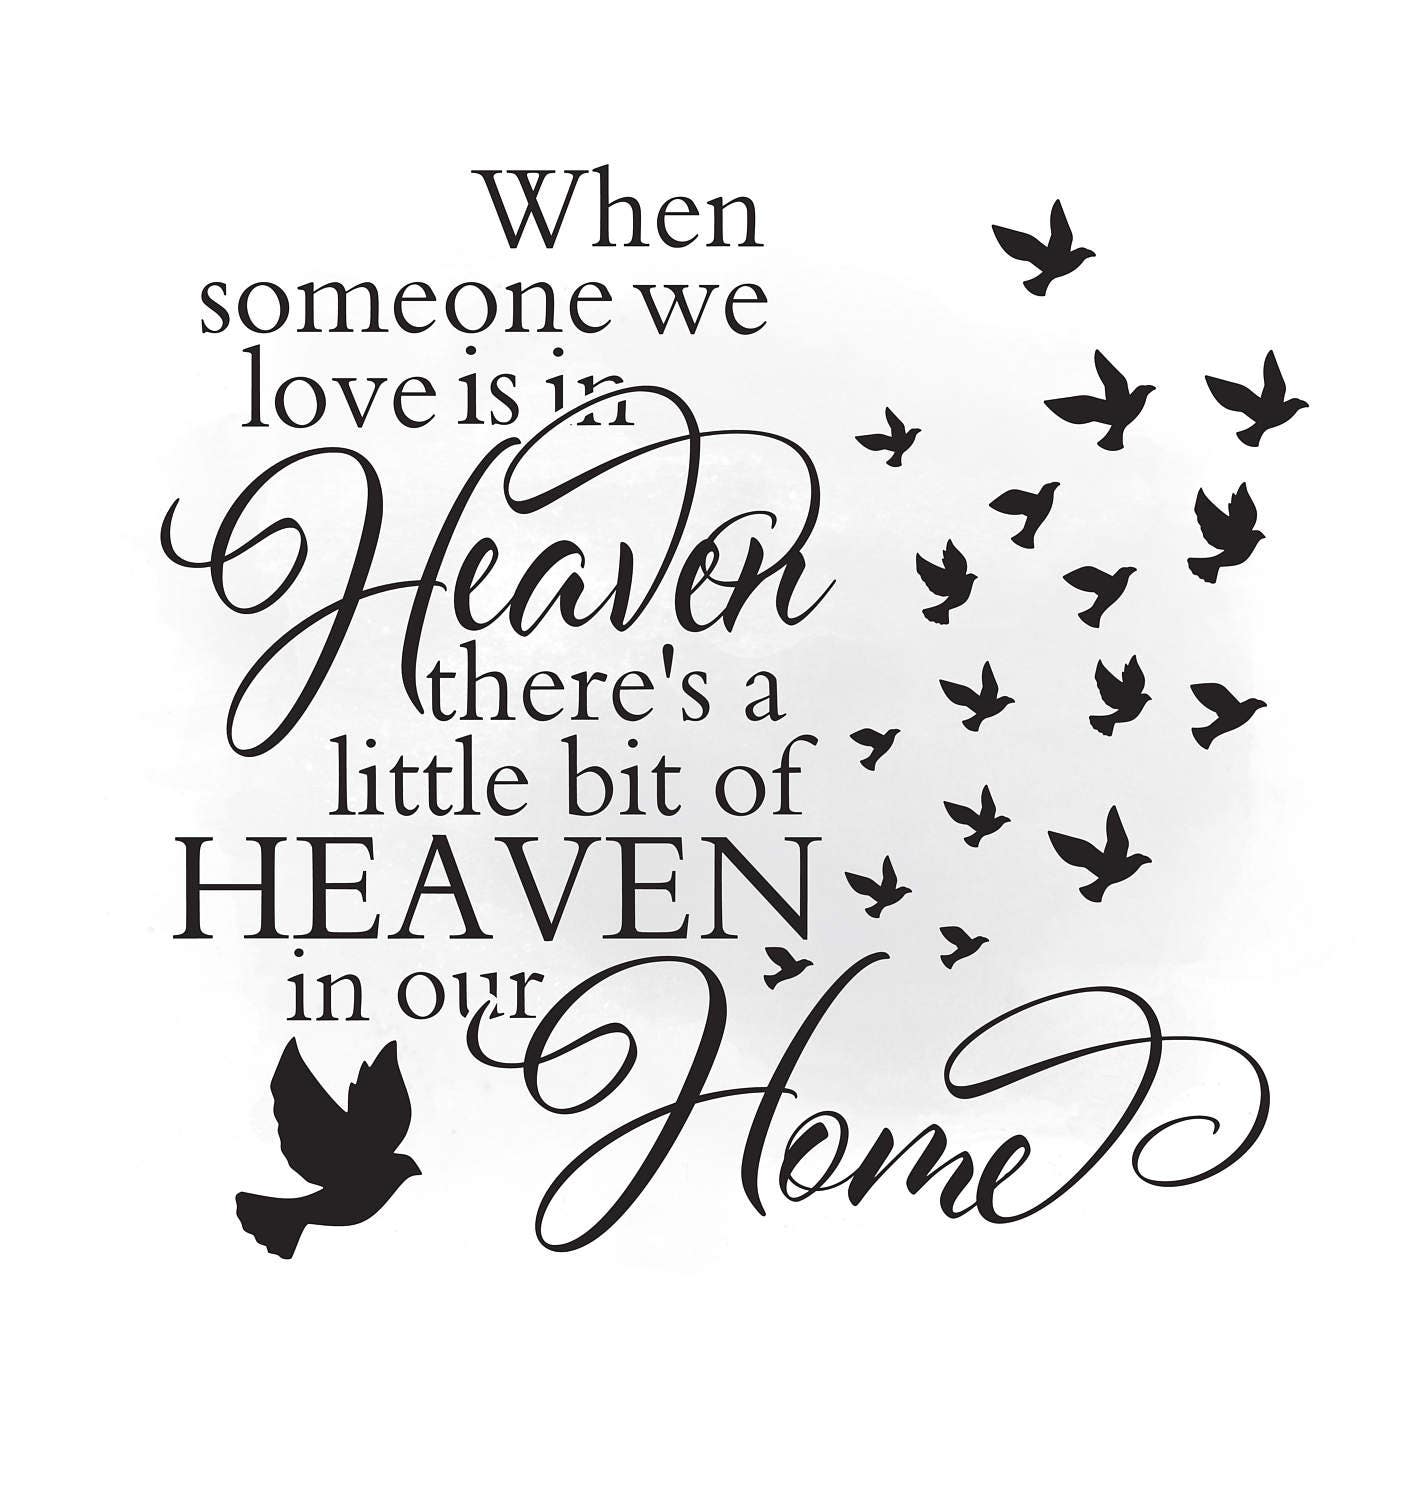 Download Heaven in our home SVG clipart, in loving memory Quote Art ...